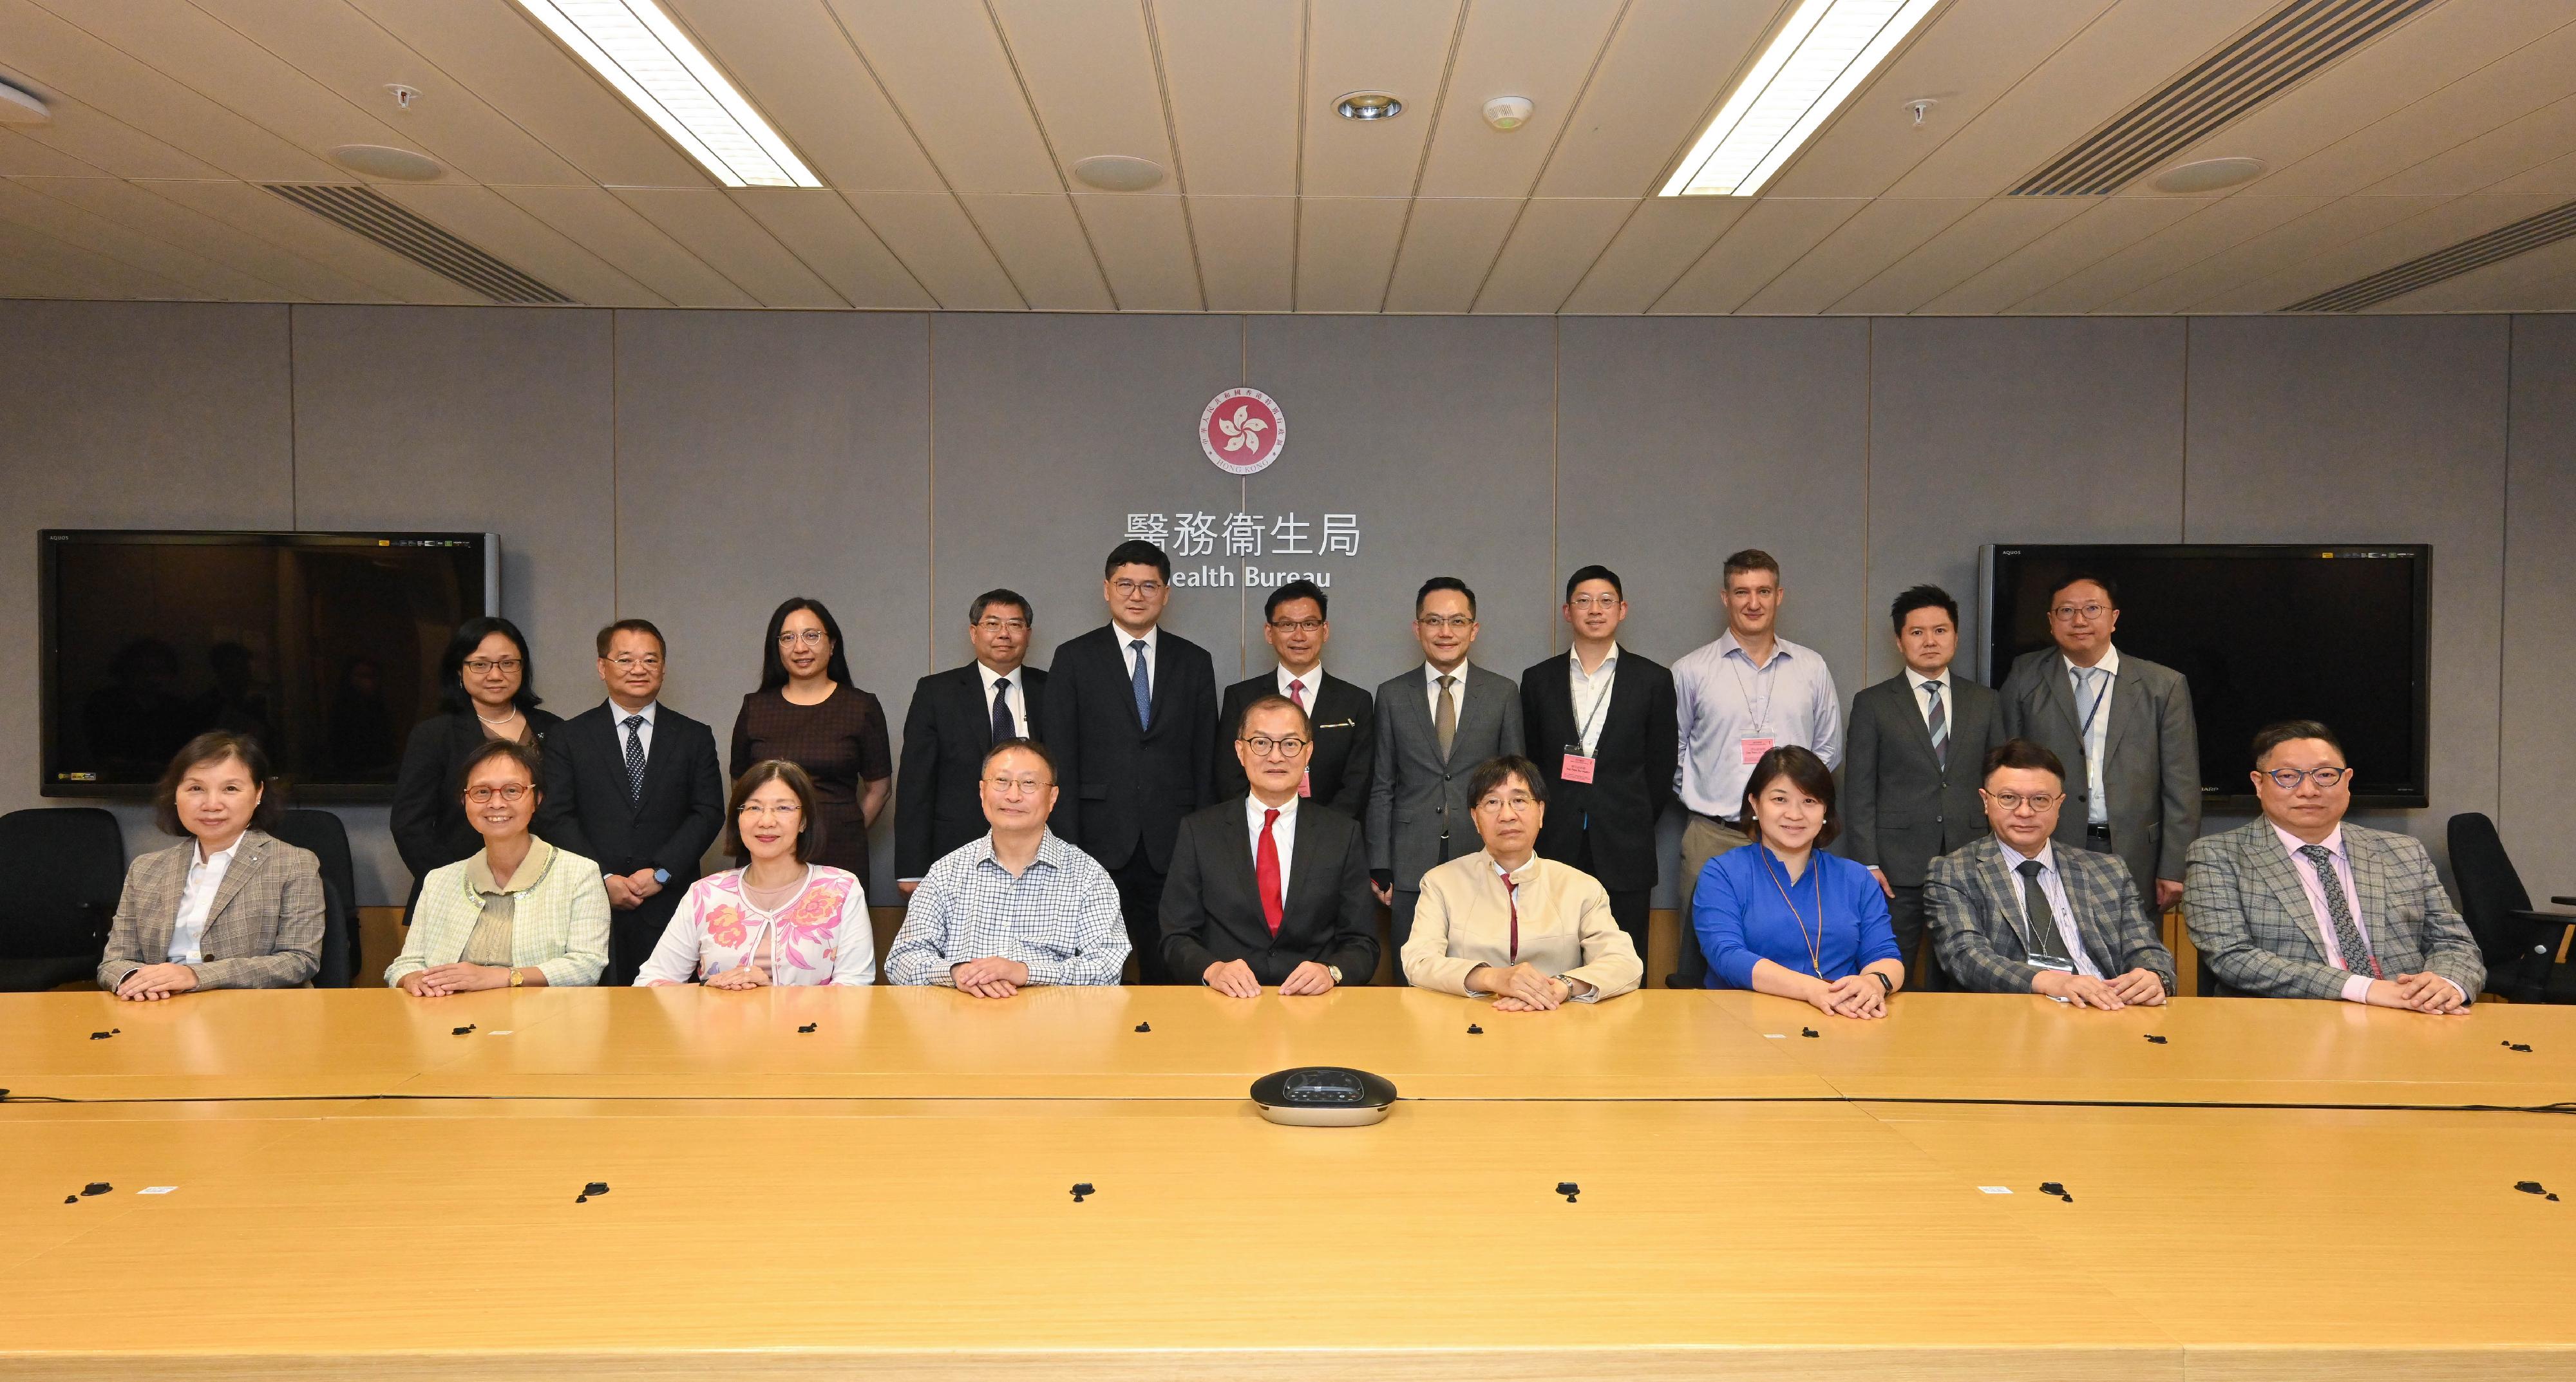 The Secretary for Health, Professor Lo Chung-mau, today (July 10) convened the eighth meeting of the High Level Steering Committee on Antimicrobial Resistance. Photo shows Professor Lo (front row, centre); the Under Secretary for Health, Dr Libby Lee (front row, third right); the Director of Health, Dr Ronald Lam (back row, fifth right); the Director of Food and Environmental Hygiene, Ms Irene Young (back row, third left); the Director of Agriculture, Fisheries and Conservation, Dr Leung Siu-fai (back row, fourth left); the Chief Executive of the Hospital Authority, Dr Tony Ko (back row, fifth left); other members and officials taking a group photo before the meeting.